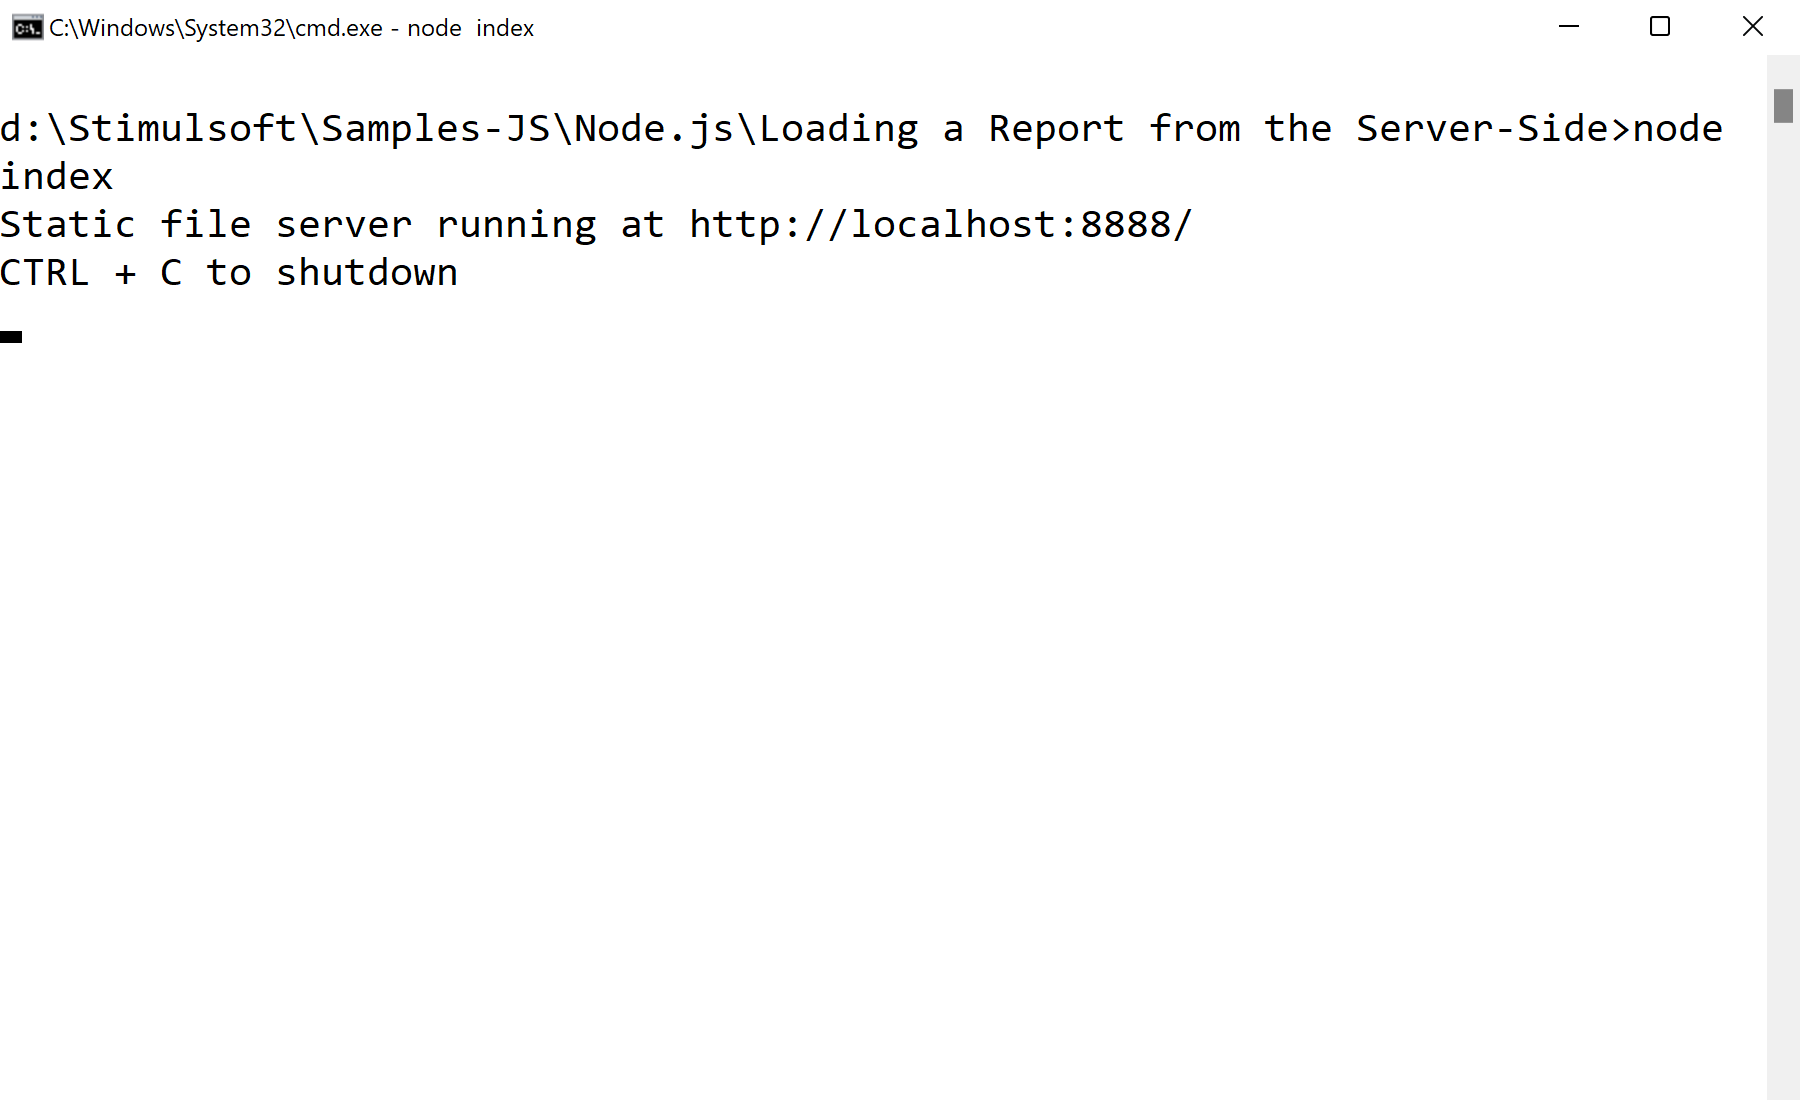 Loading a Report from the Server-Side